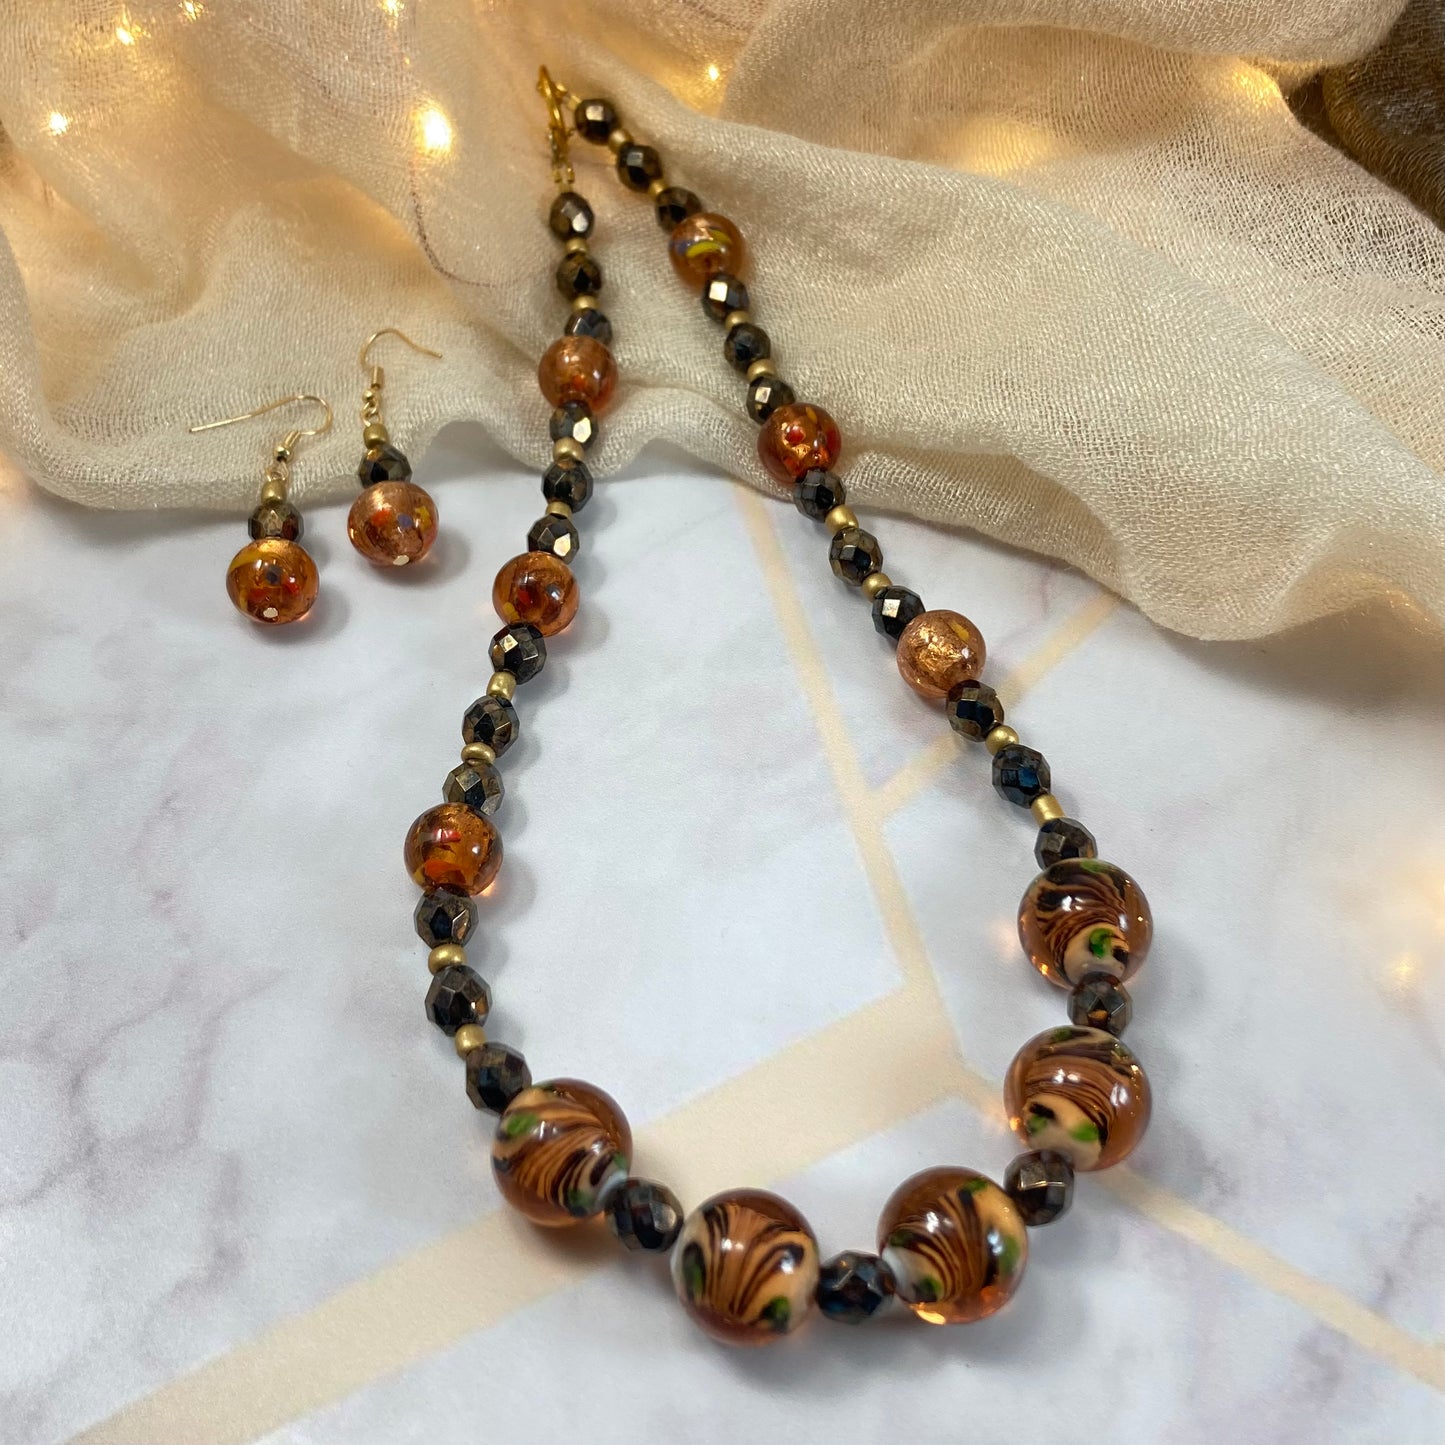 21S - Amberglass Necklace and Earring Set